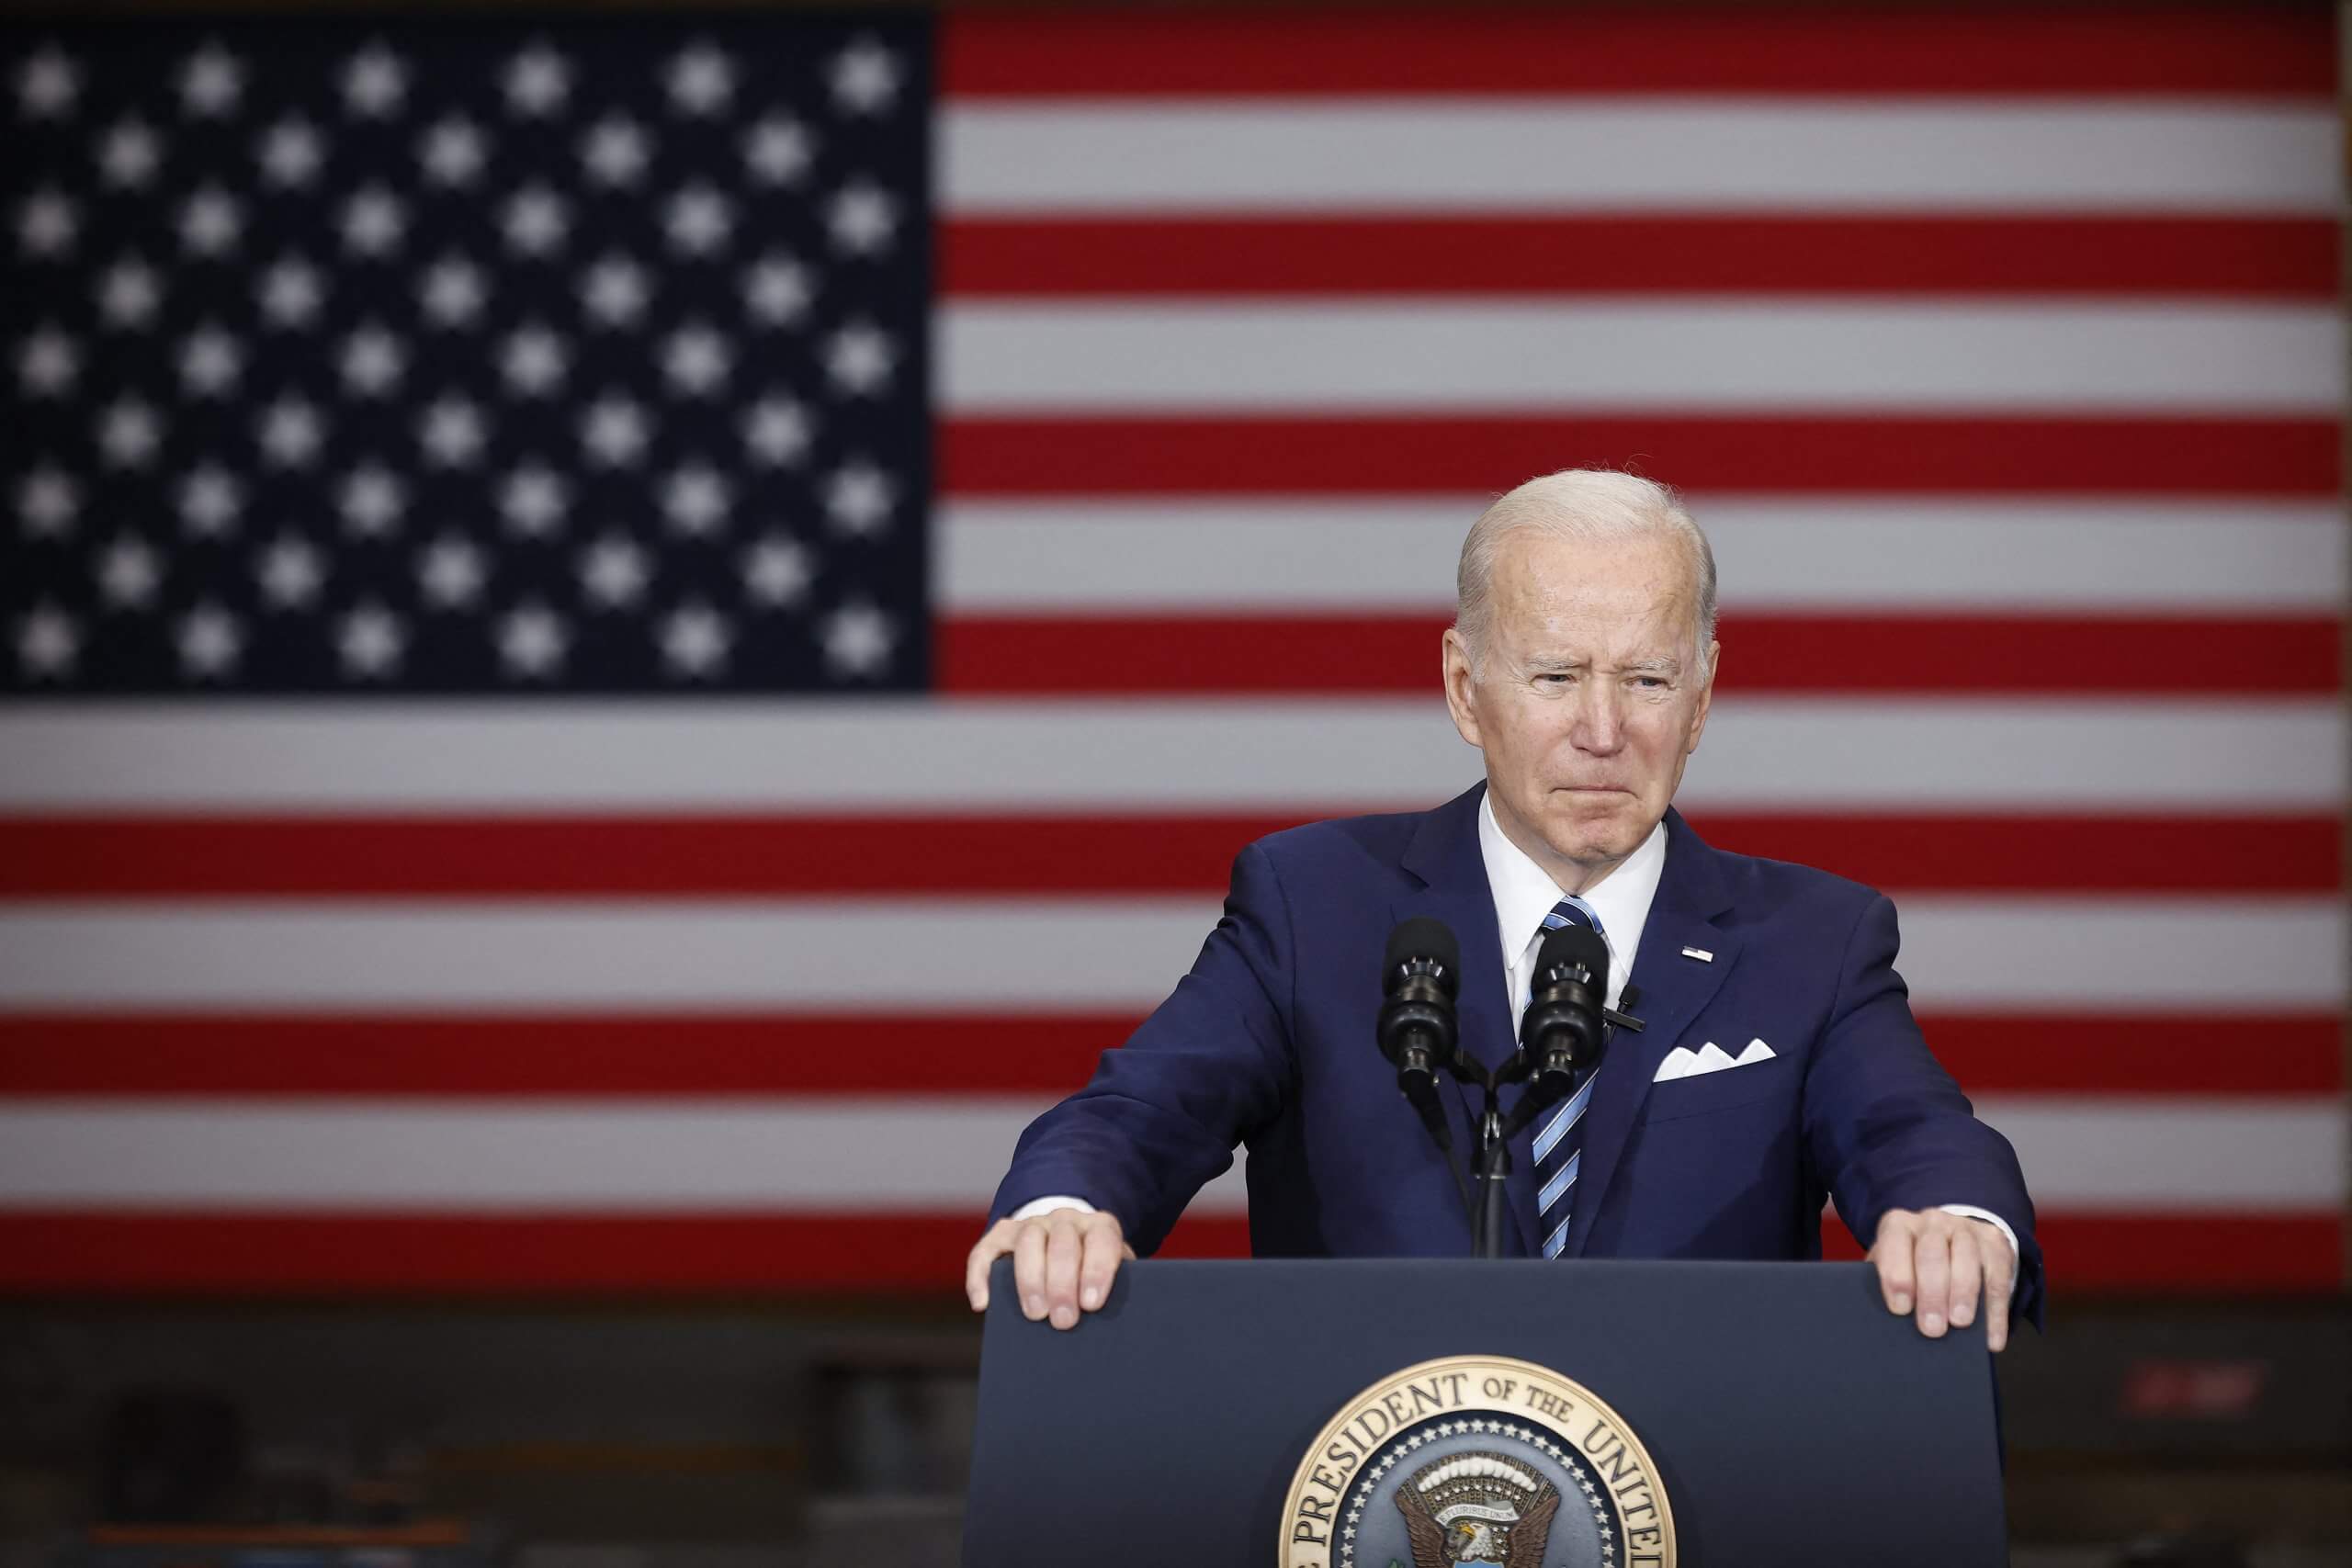 The order signed by US President Joe Biden is basically directing the federal government to come up with a plan to regulate the cryptocurrency space